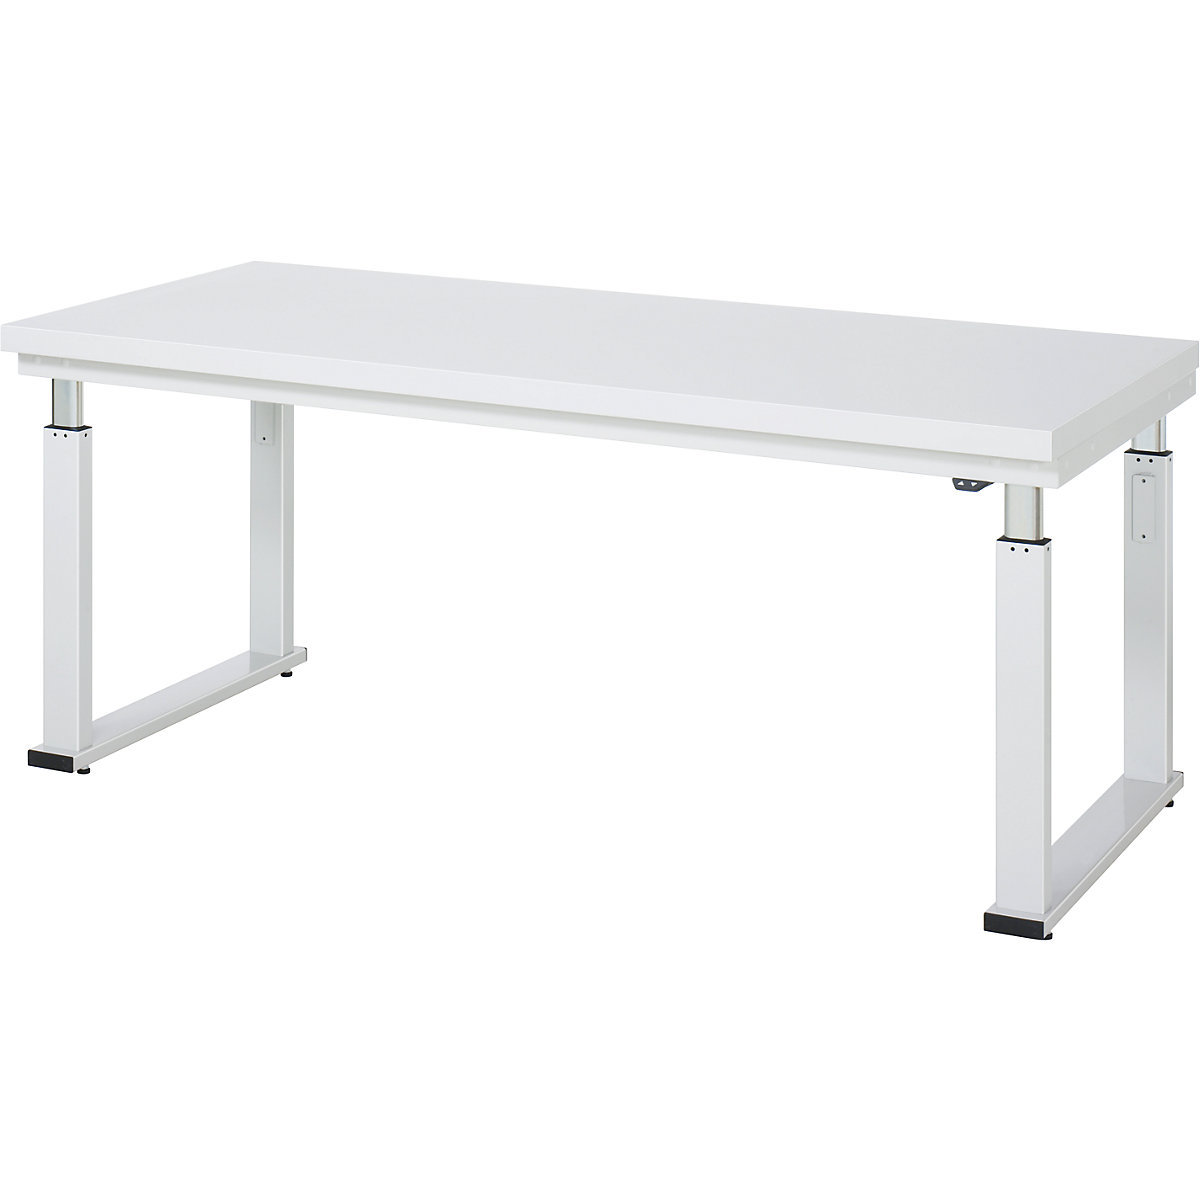 Work table, electric height adjustment – RAU, hardened laminate worktop, max. load 600 kg, WxD 2000 x 900 mm-10